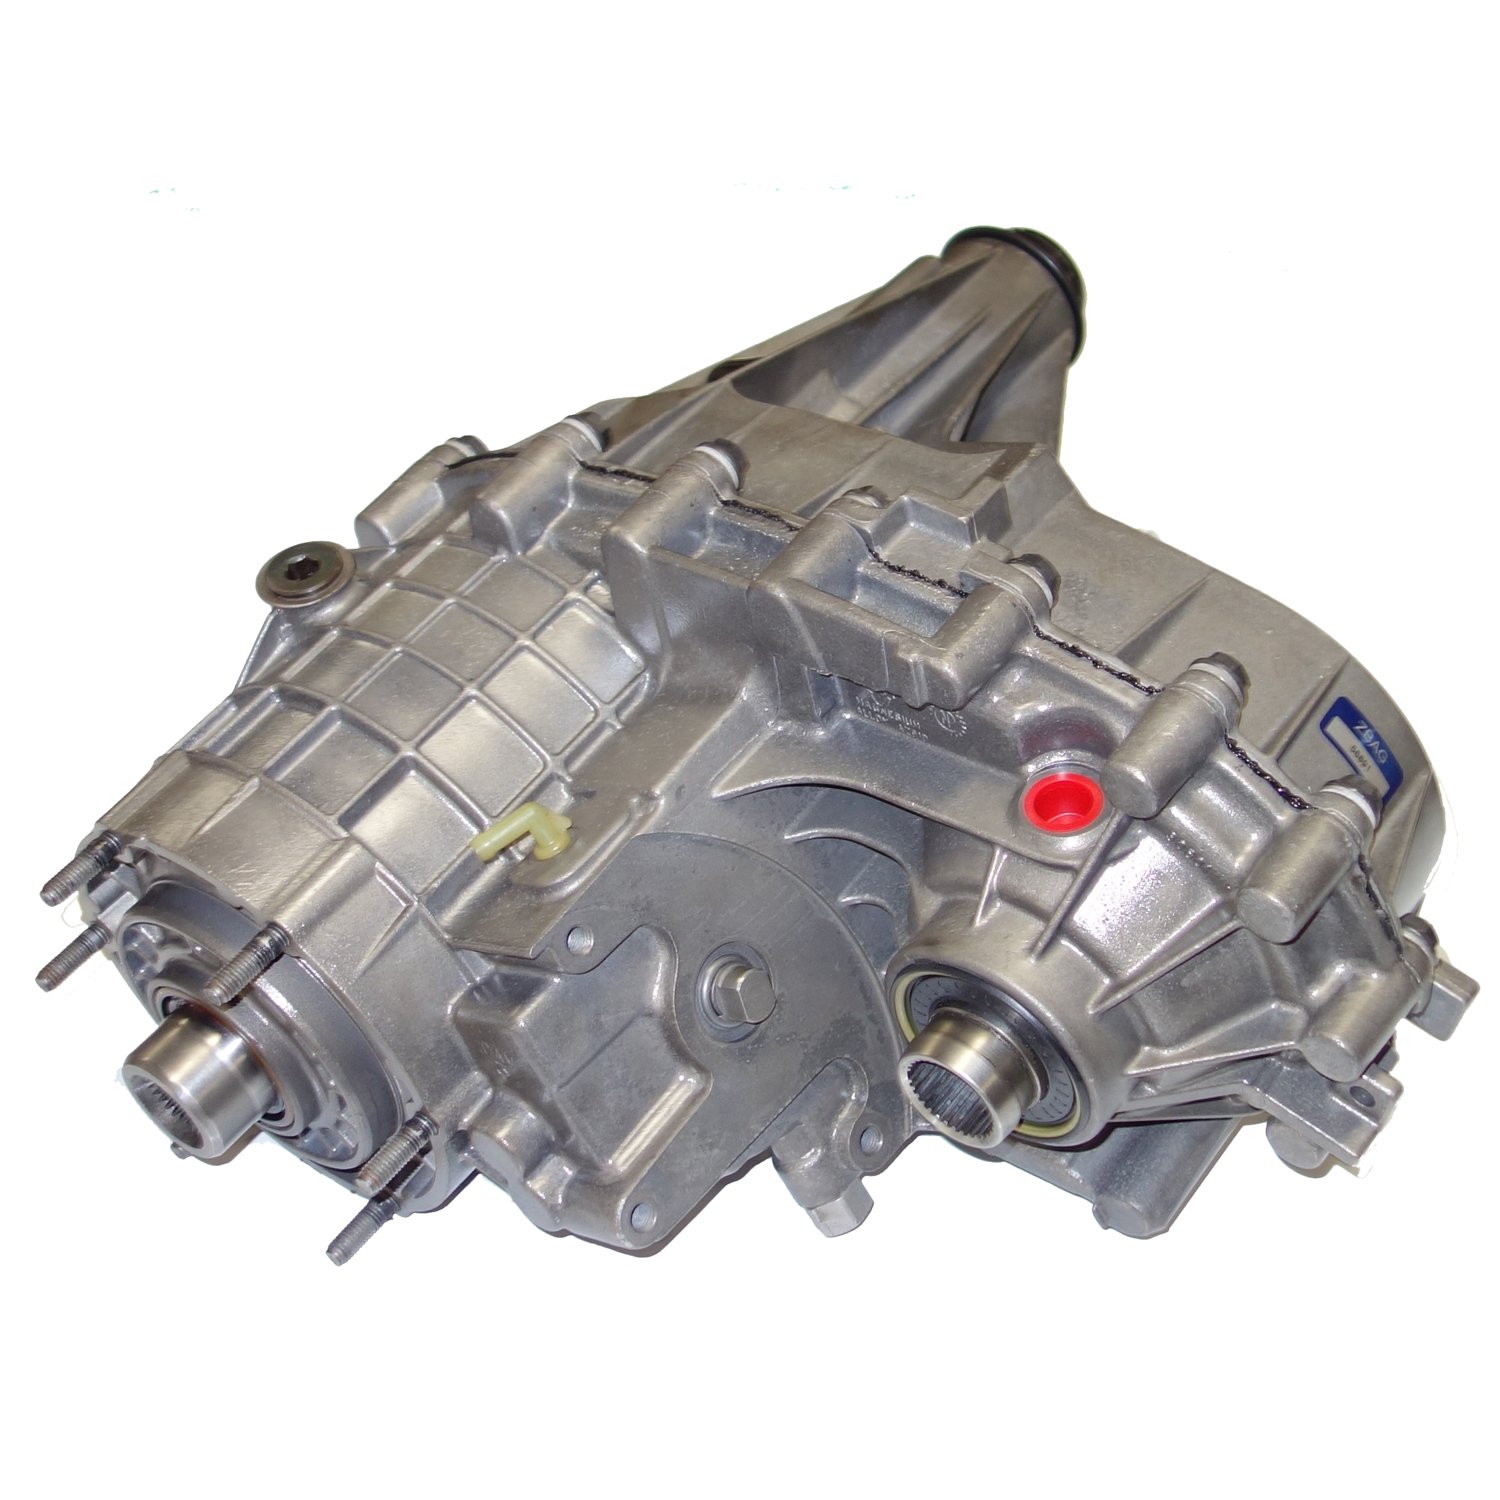 Remanufactured NP246 Transfer Case for GM 99-2002 1500